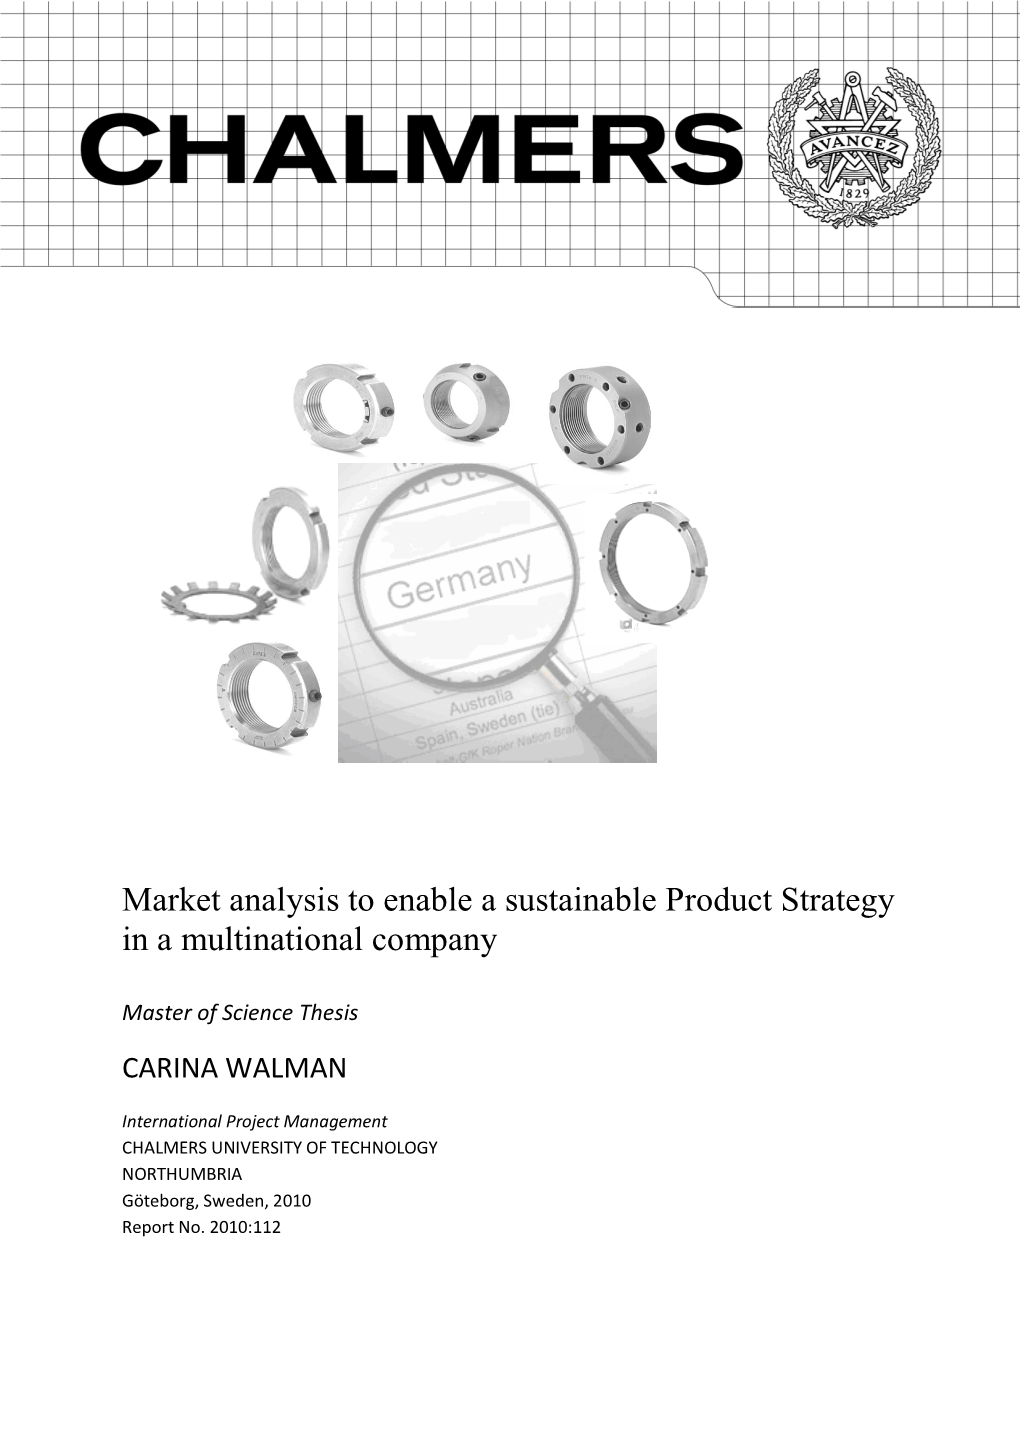 Market Analysis to Enable a Sustainable Product Strategy in a Multinational Company